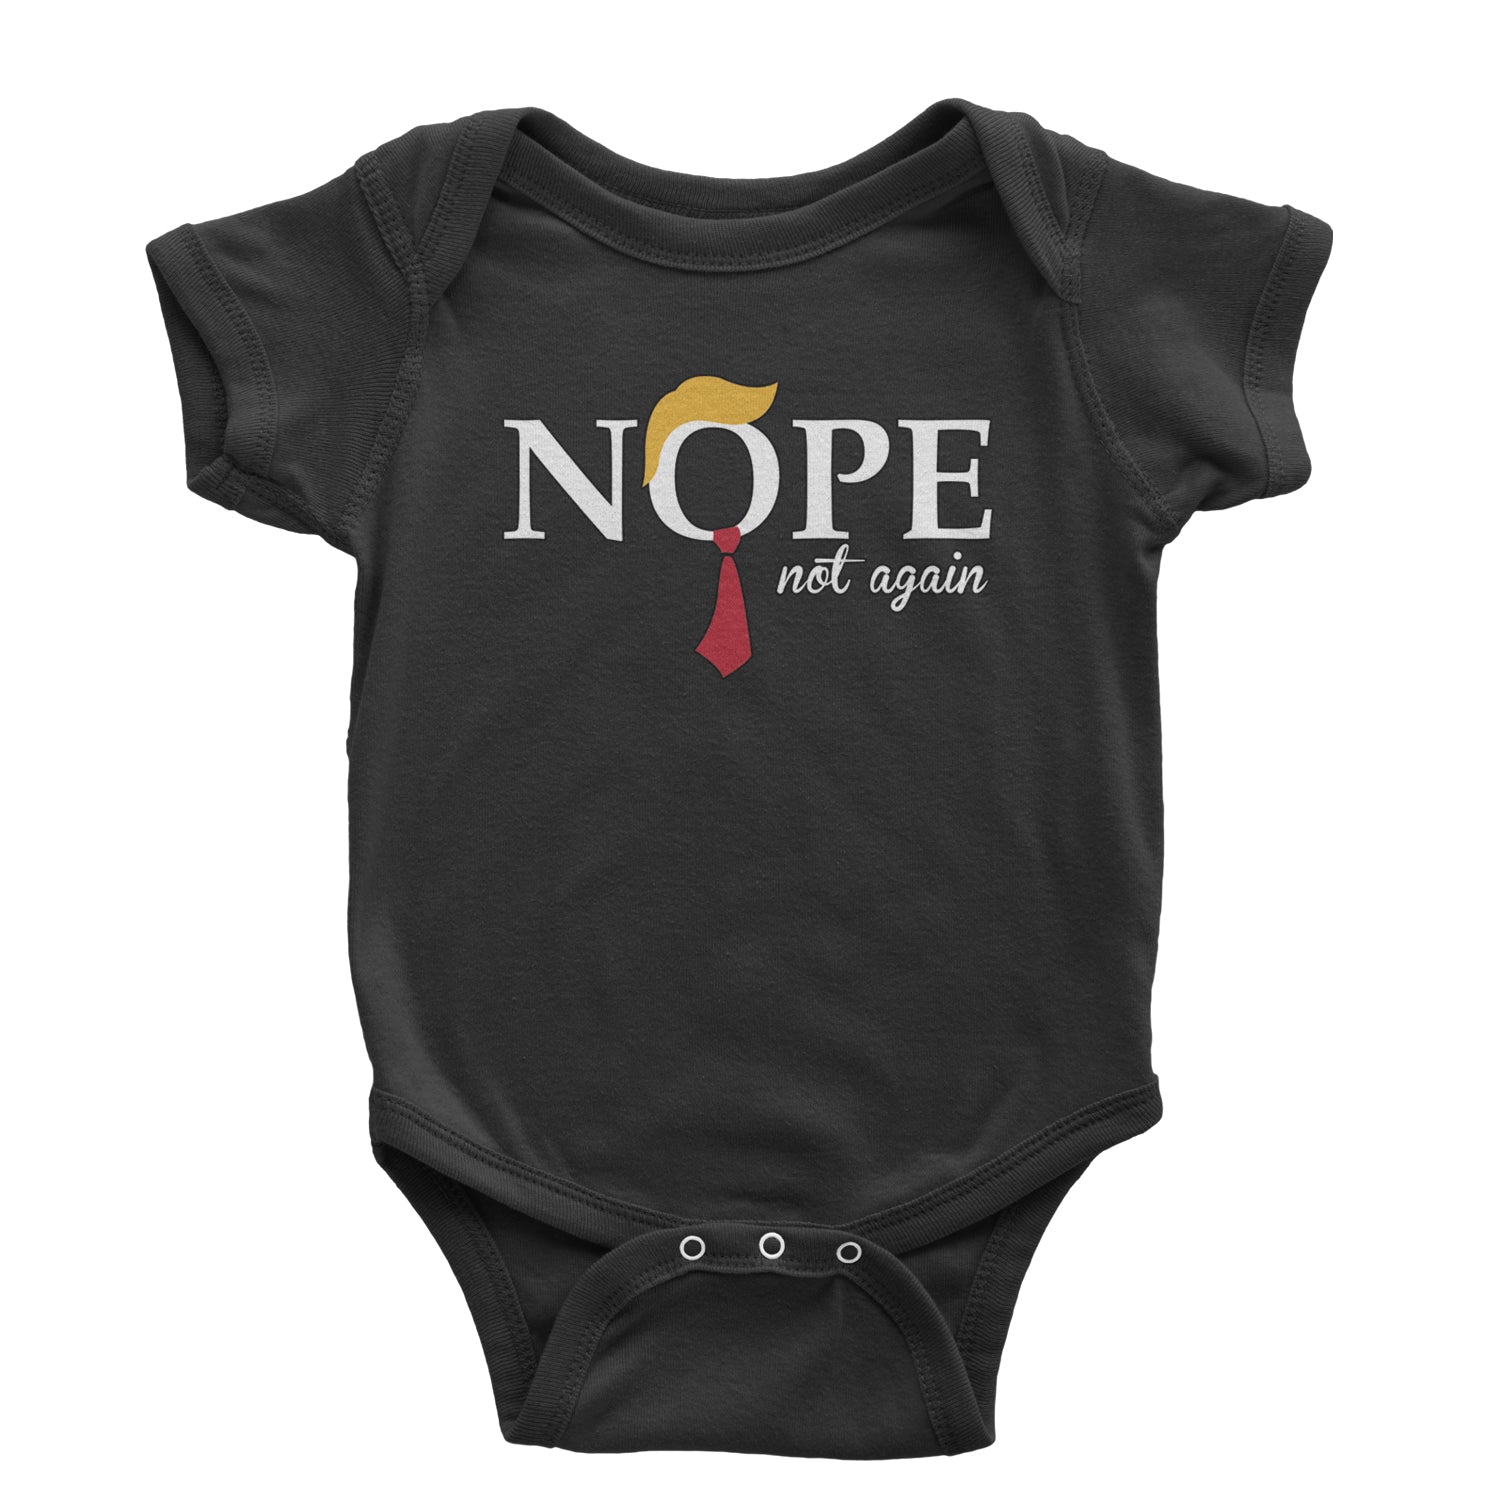 Nope Not Again Swift Anti-Trump Infant One-Piece Romper Bodysuit and Toddler T-shirt